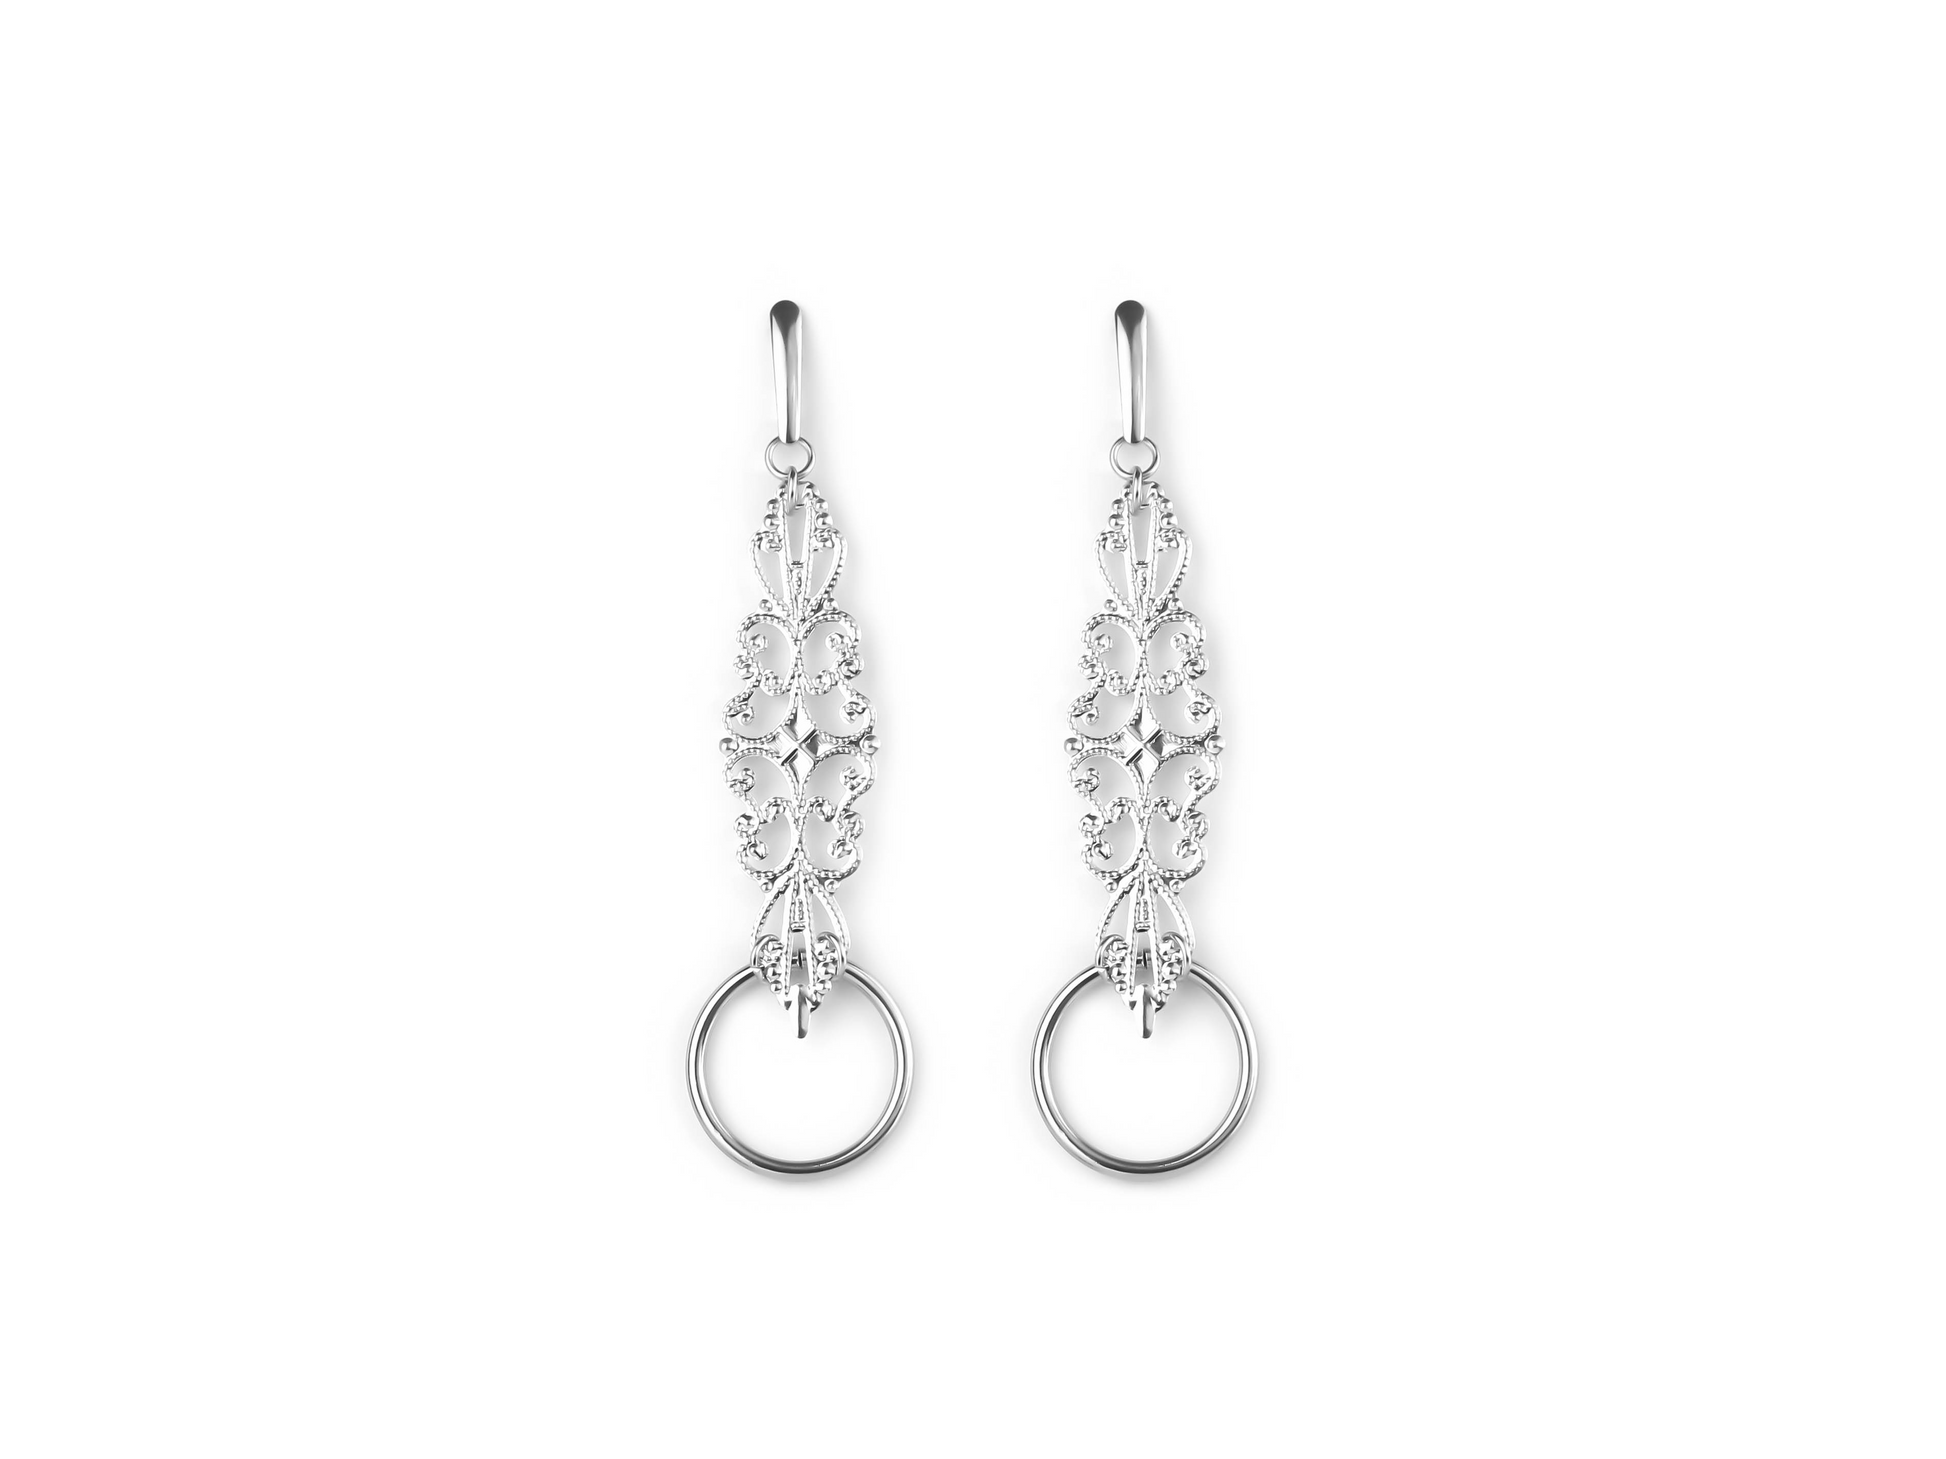 Myril Jewels presents a captivating pair of filigree-shaped earrings with an O-ring detail, embodying a sophisticated neo-gothic aesthetic. Ideal for those seeking gothic-chic or punk jewelry accents for their wardrobe